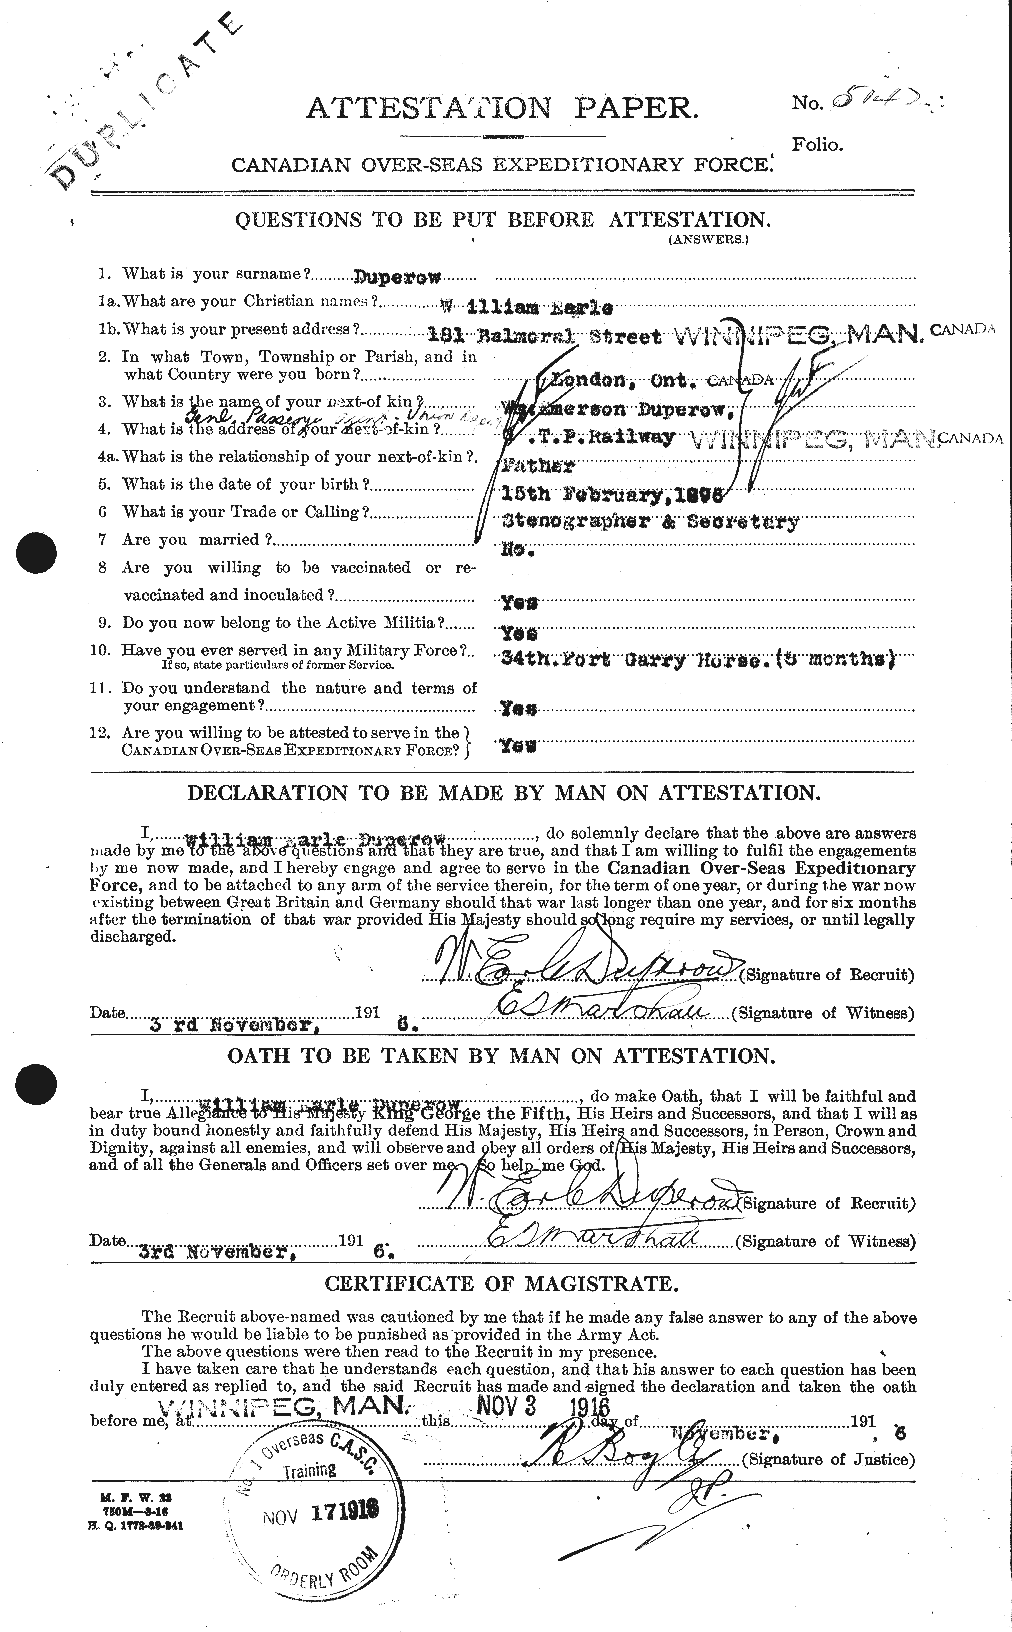 Personnel Records of the First World War - CEF 305034a